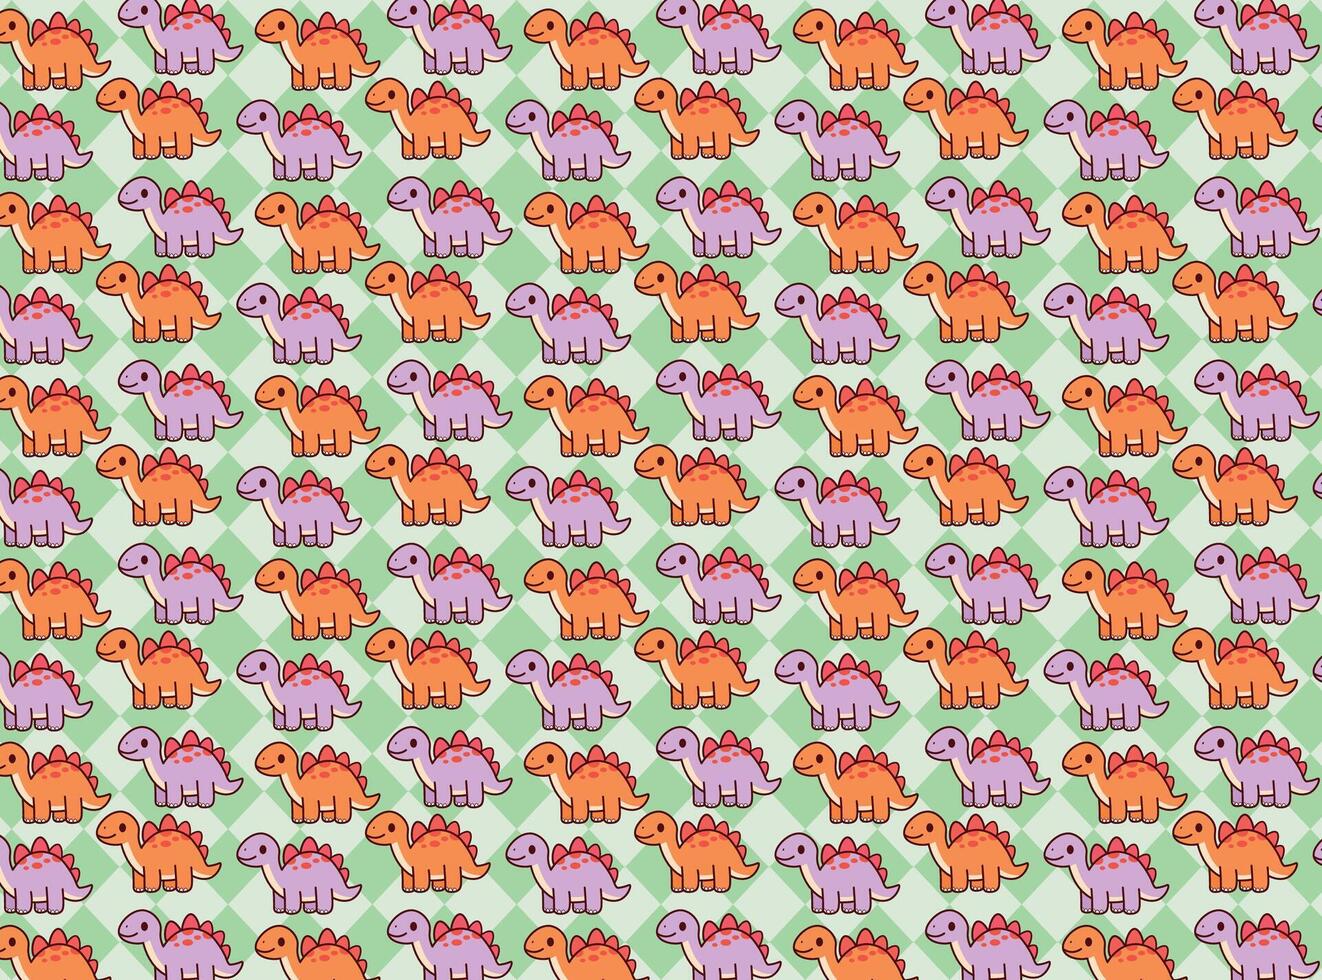 Cute dinosaur illustration, pattern, vector, for backgrounds, children's fabric textures vector